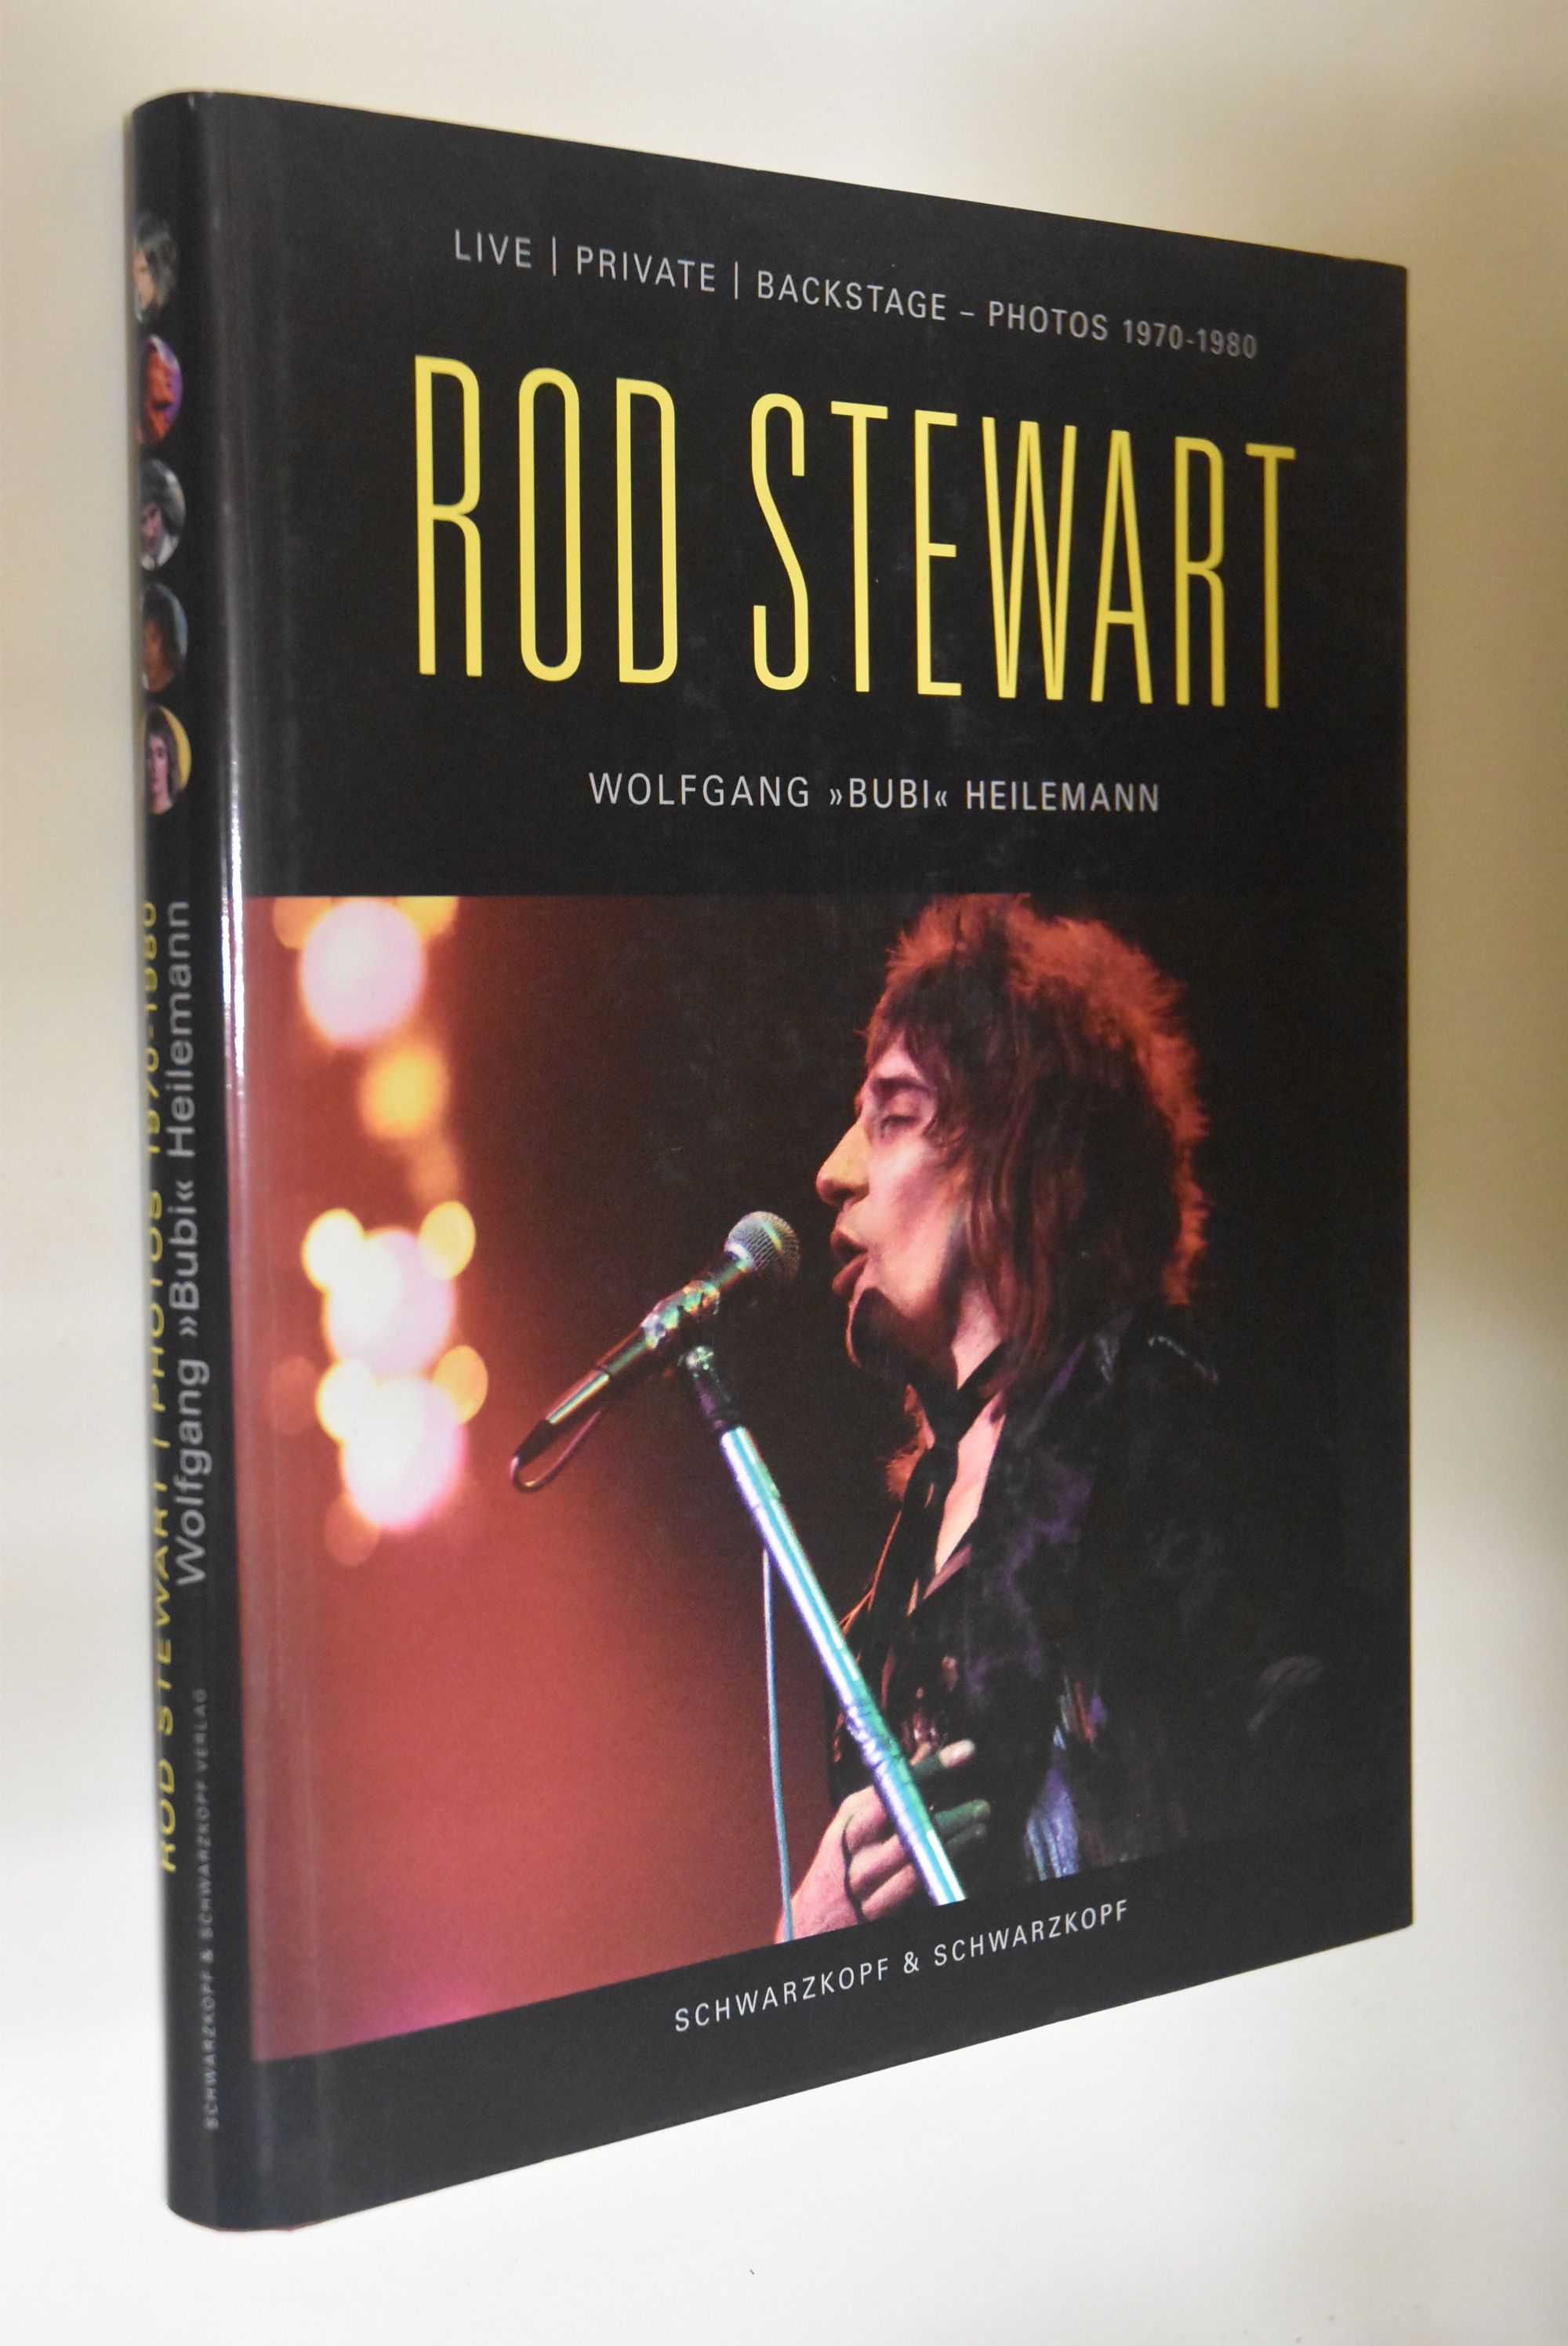 Rod Stewart: live; private; backstage - Photos 1970 - 1980. Photos: Wolfgang 